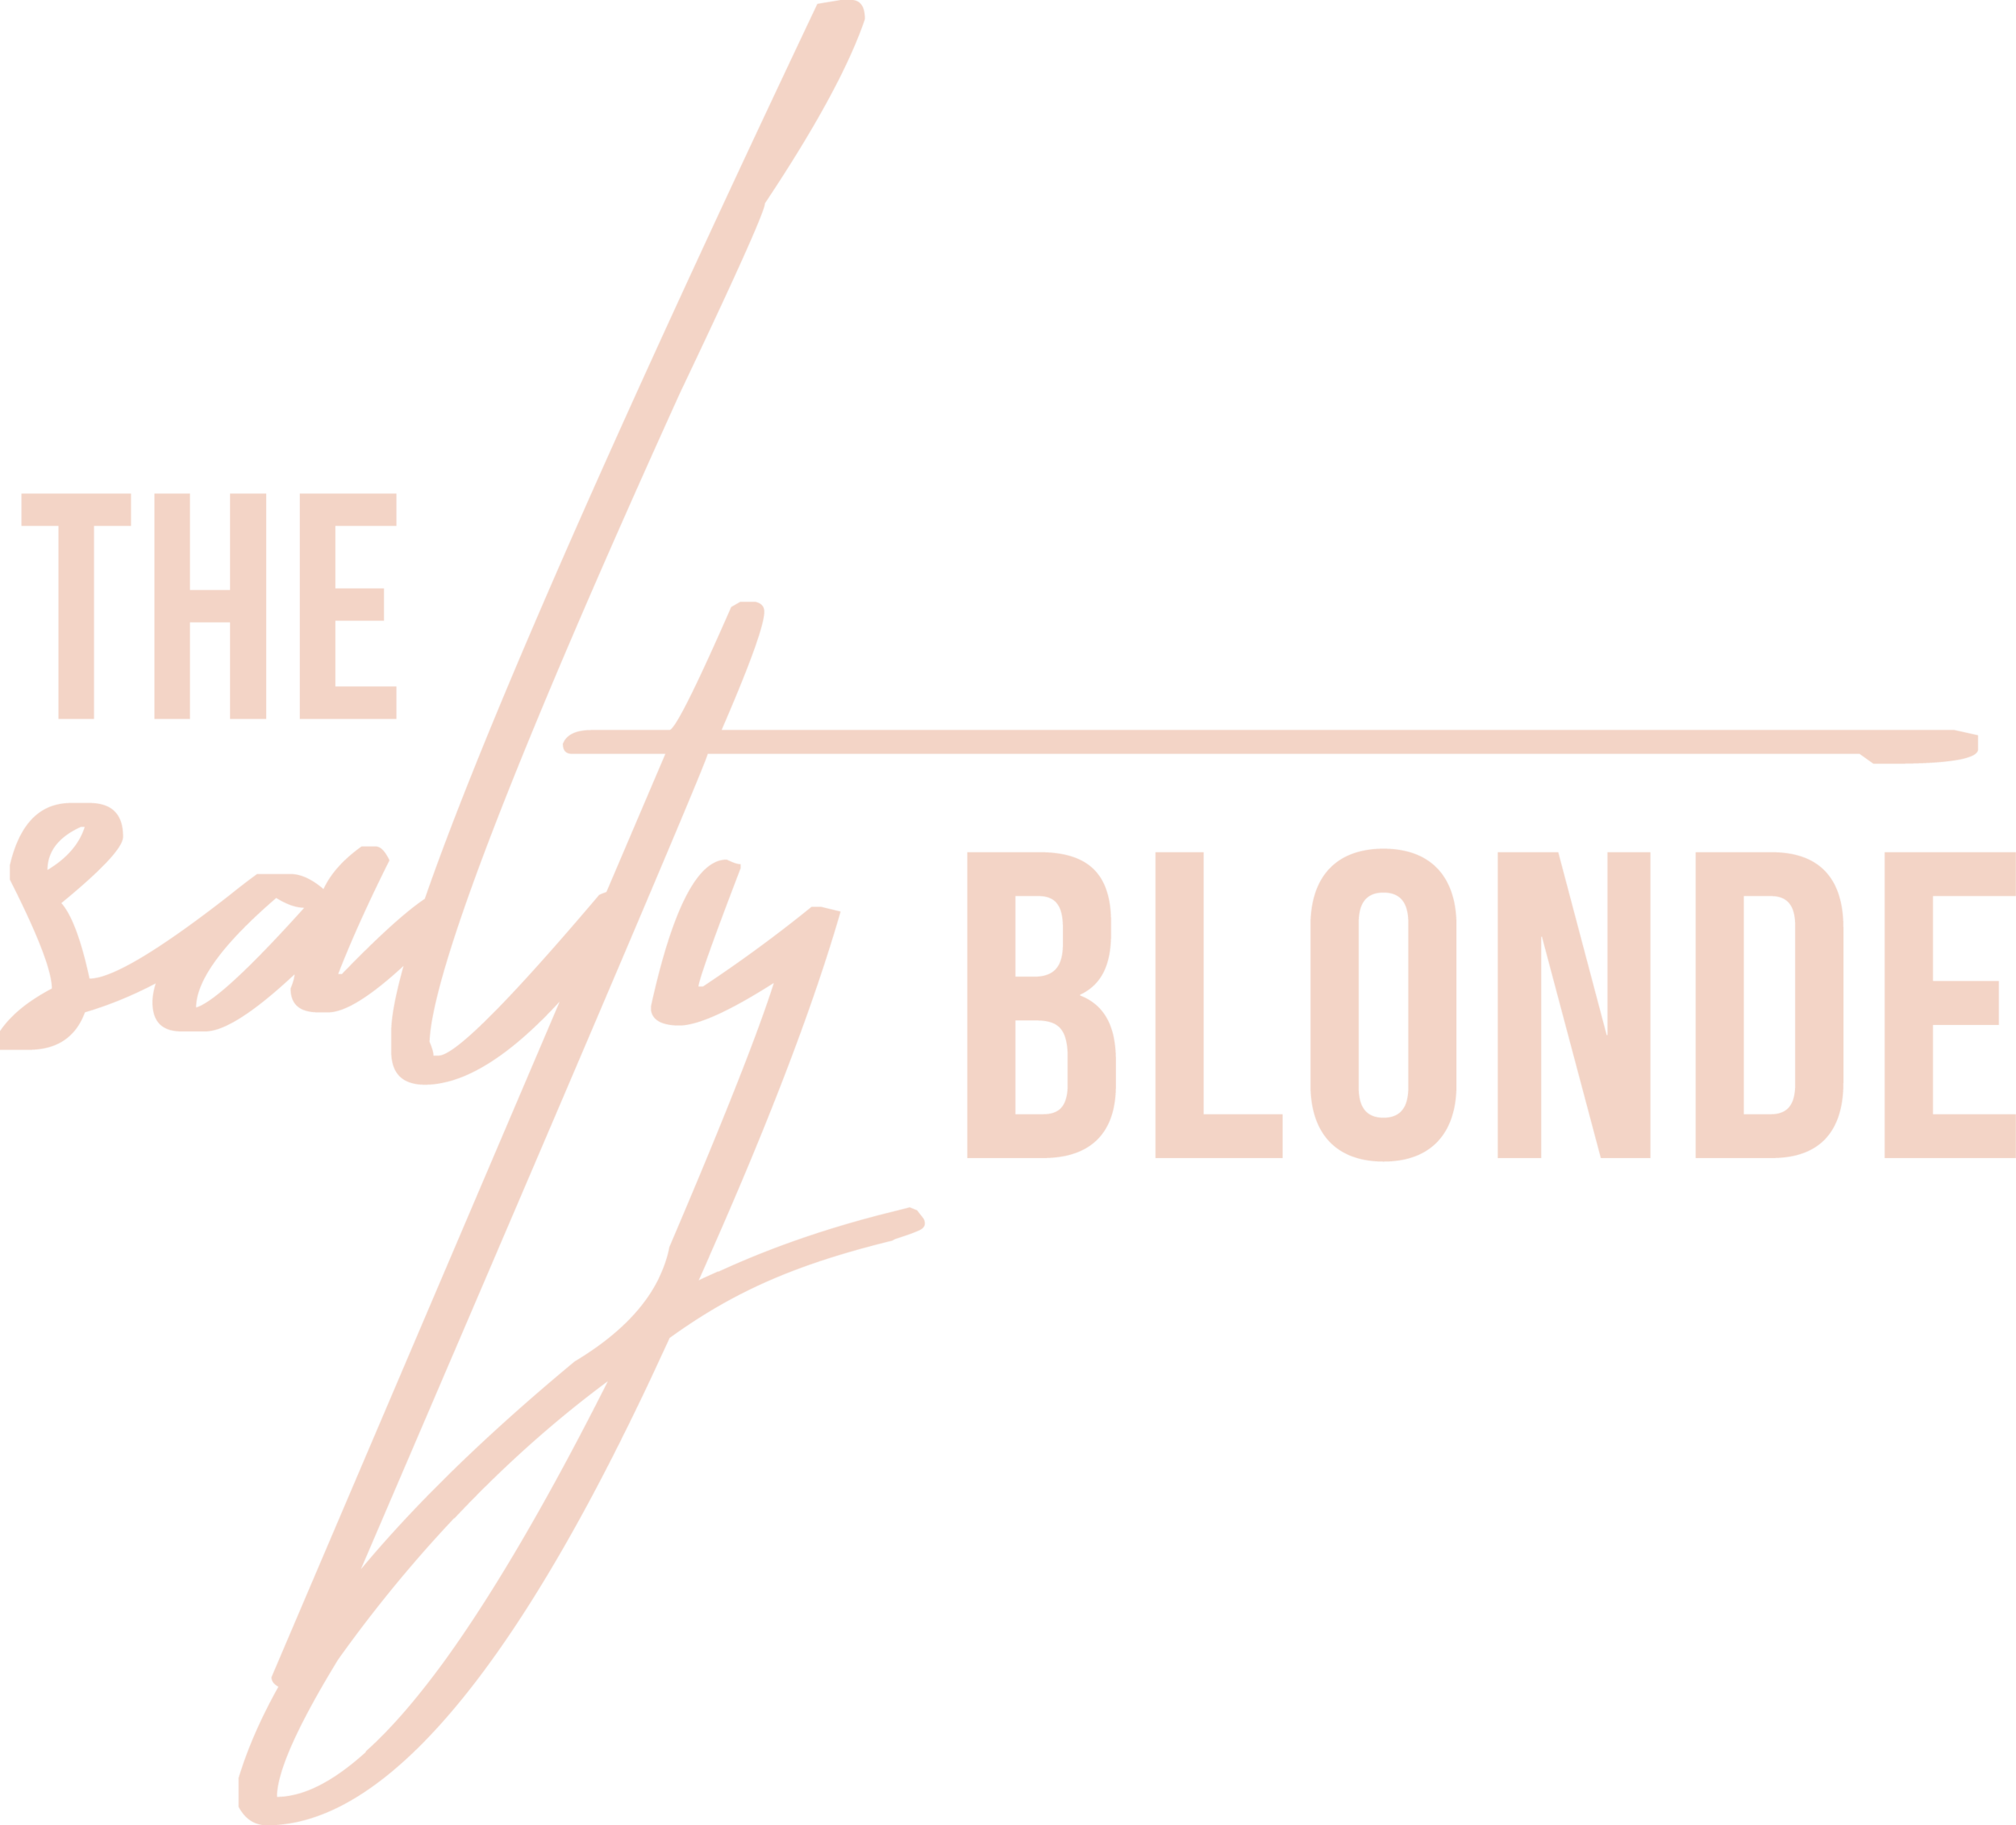 The Salty Blonde